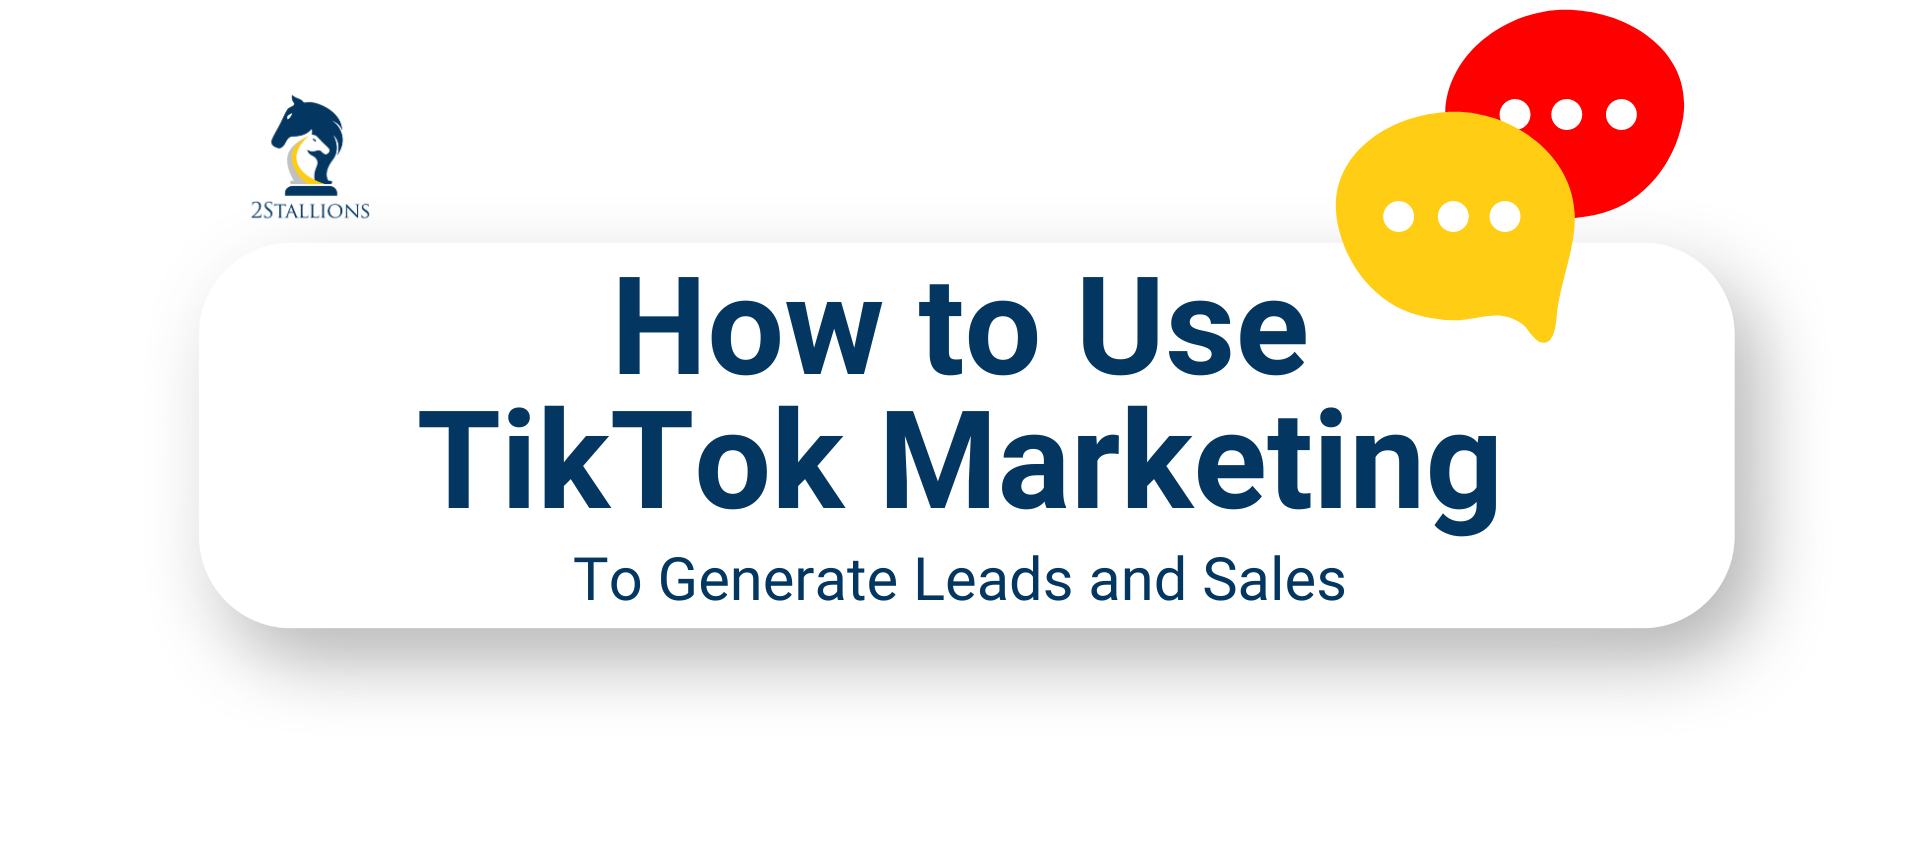 How to Use TikTok Marketing to Generate Leads and Sales